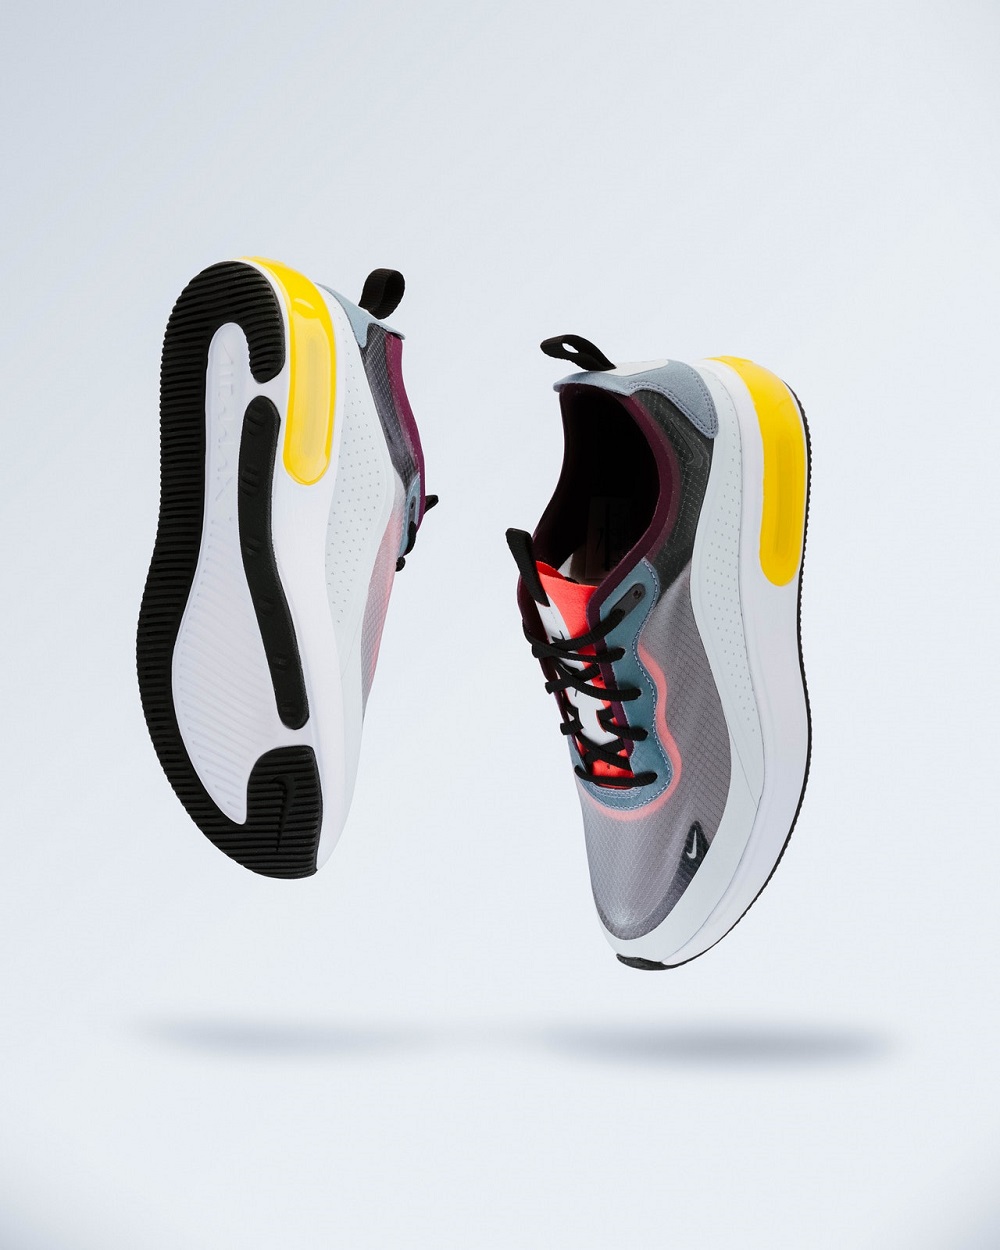 Running shoes - Product photography editing